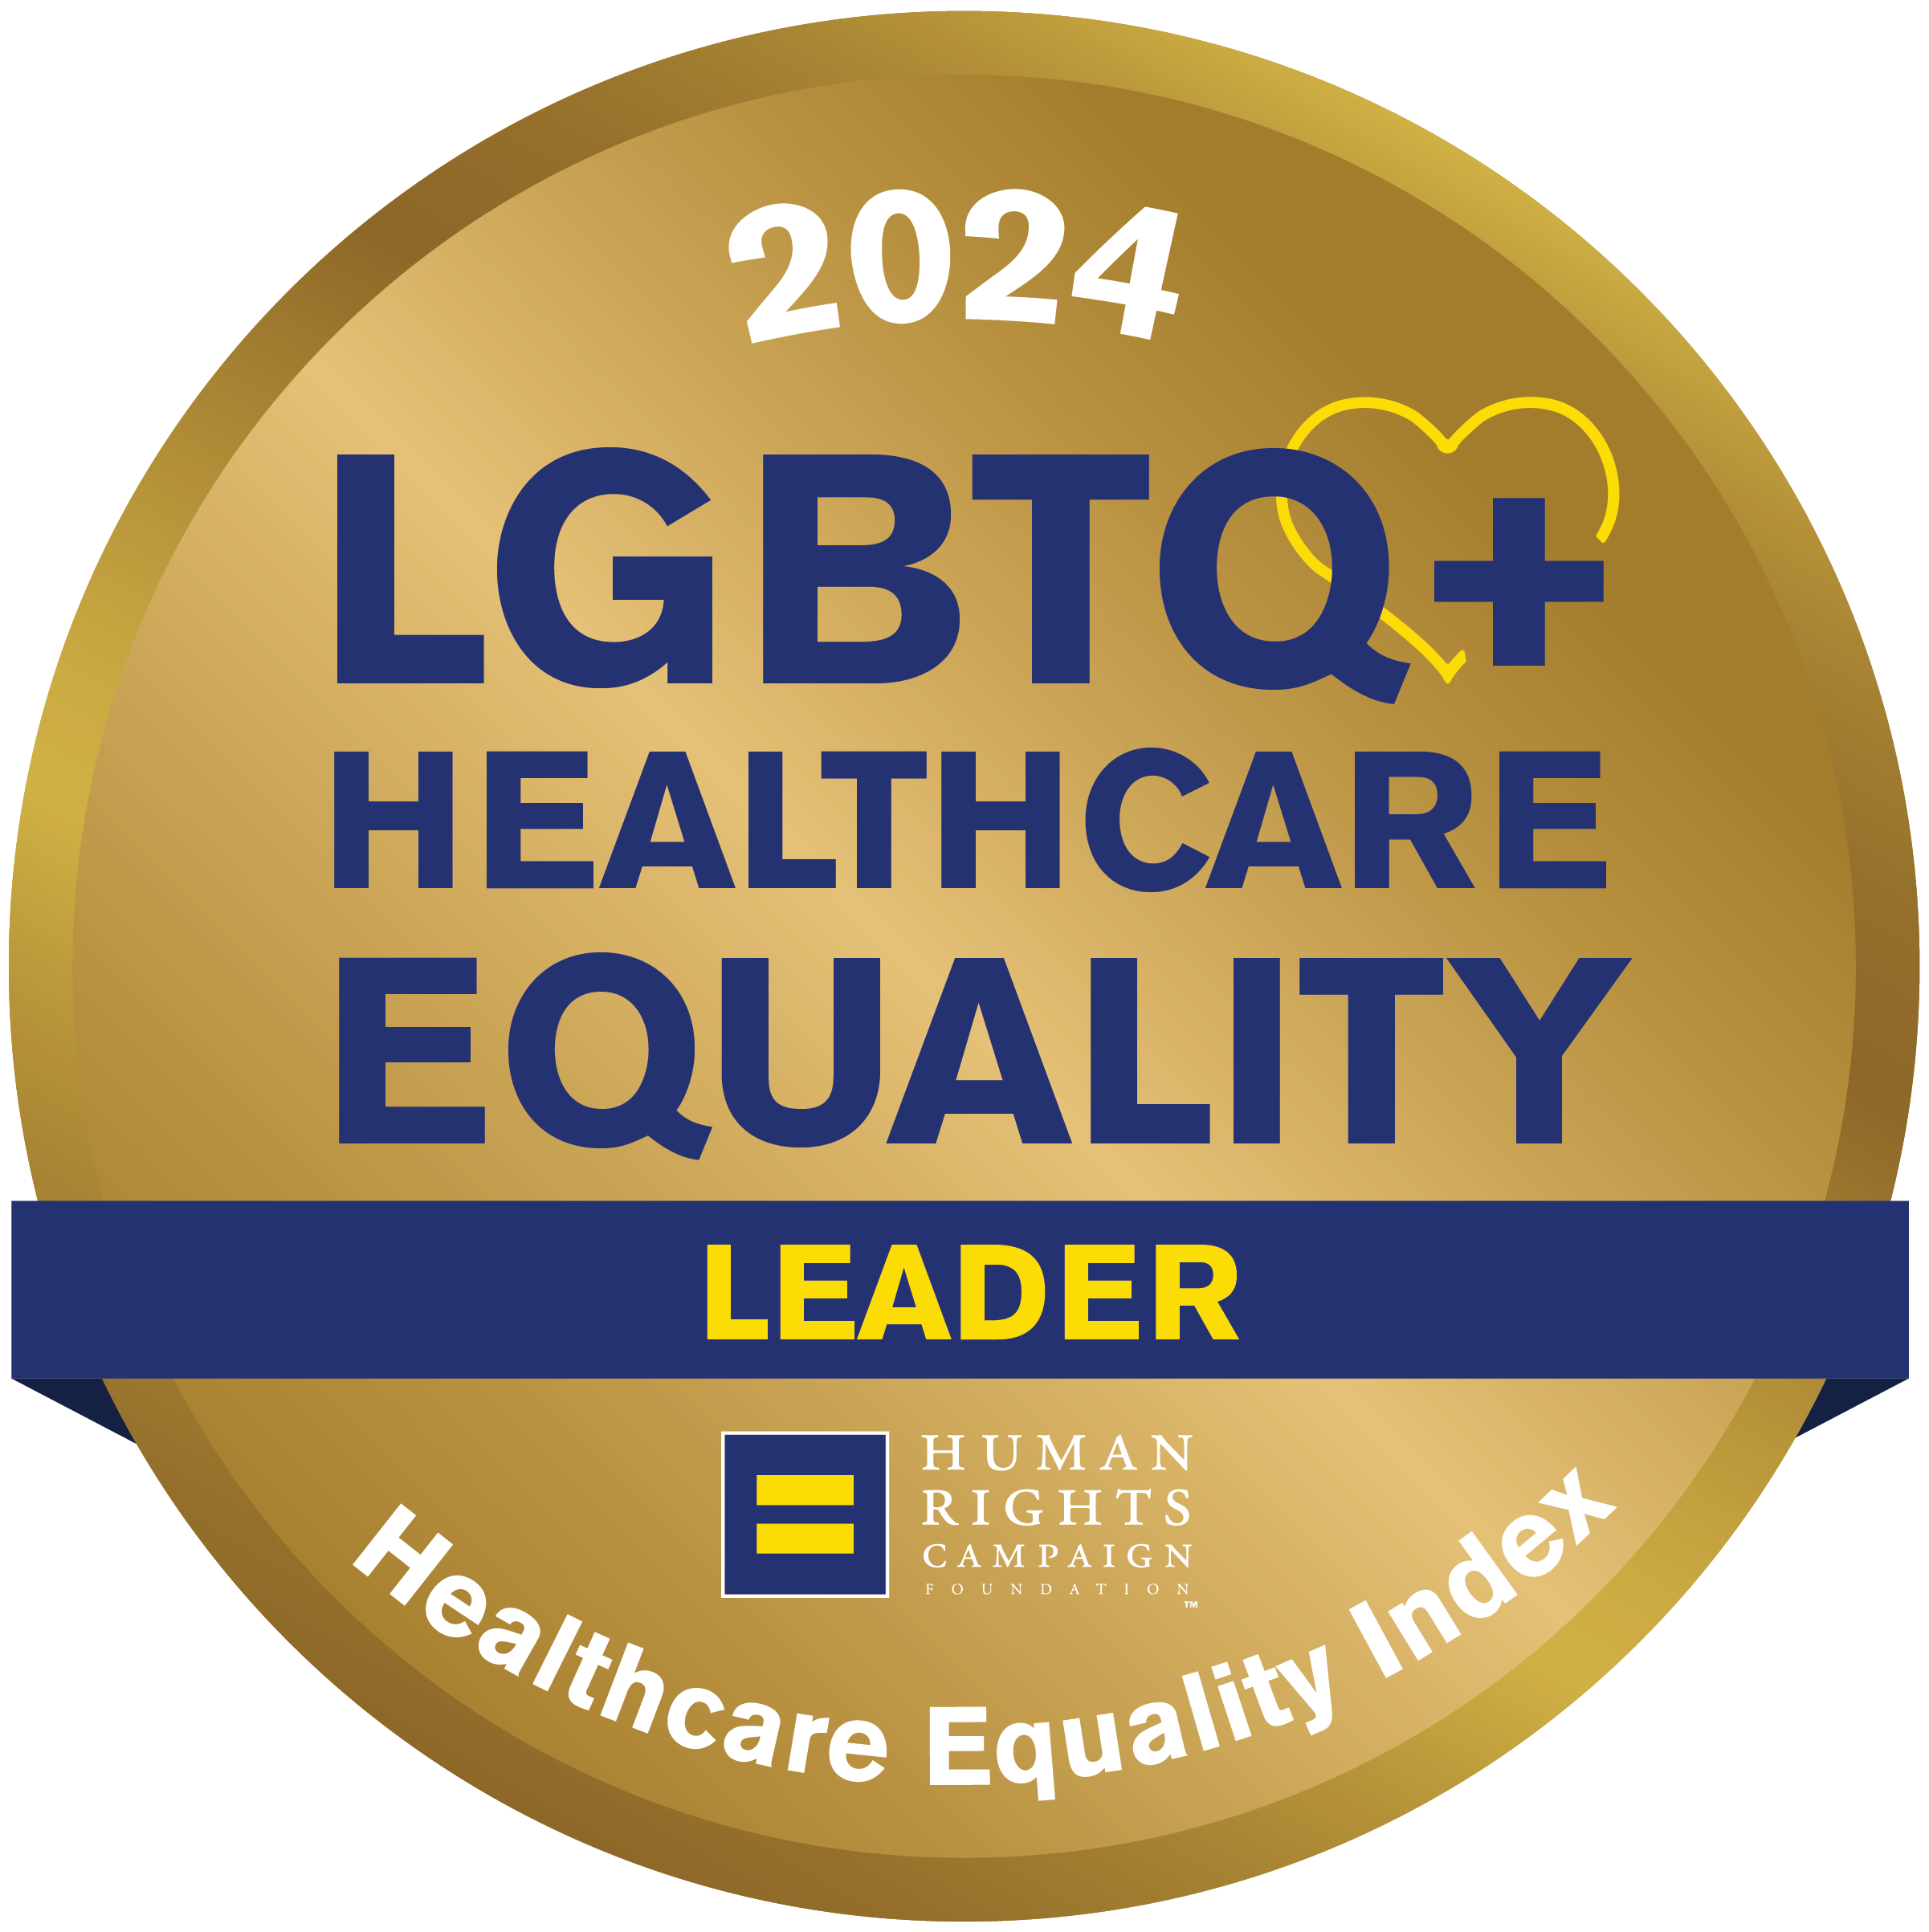 Healthcare Equality Index LGBTQ Healthcare Equality Leader - Human Rights Campaign Foundation 2024